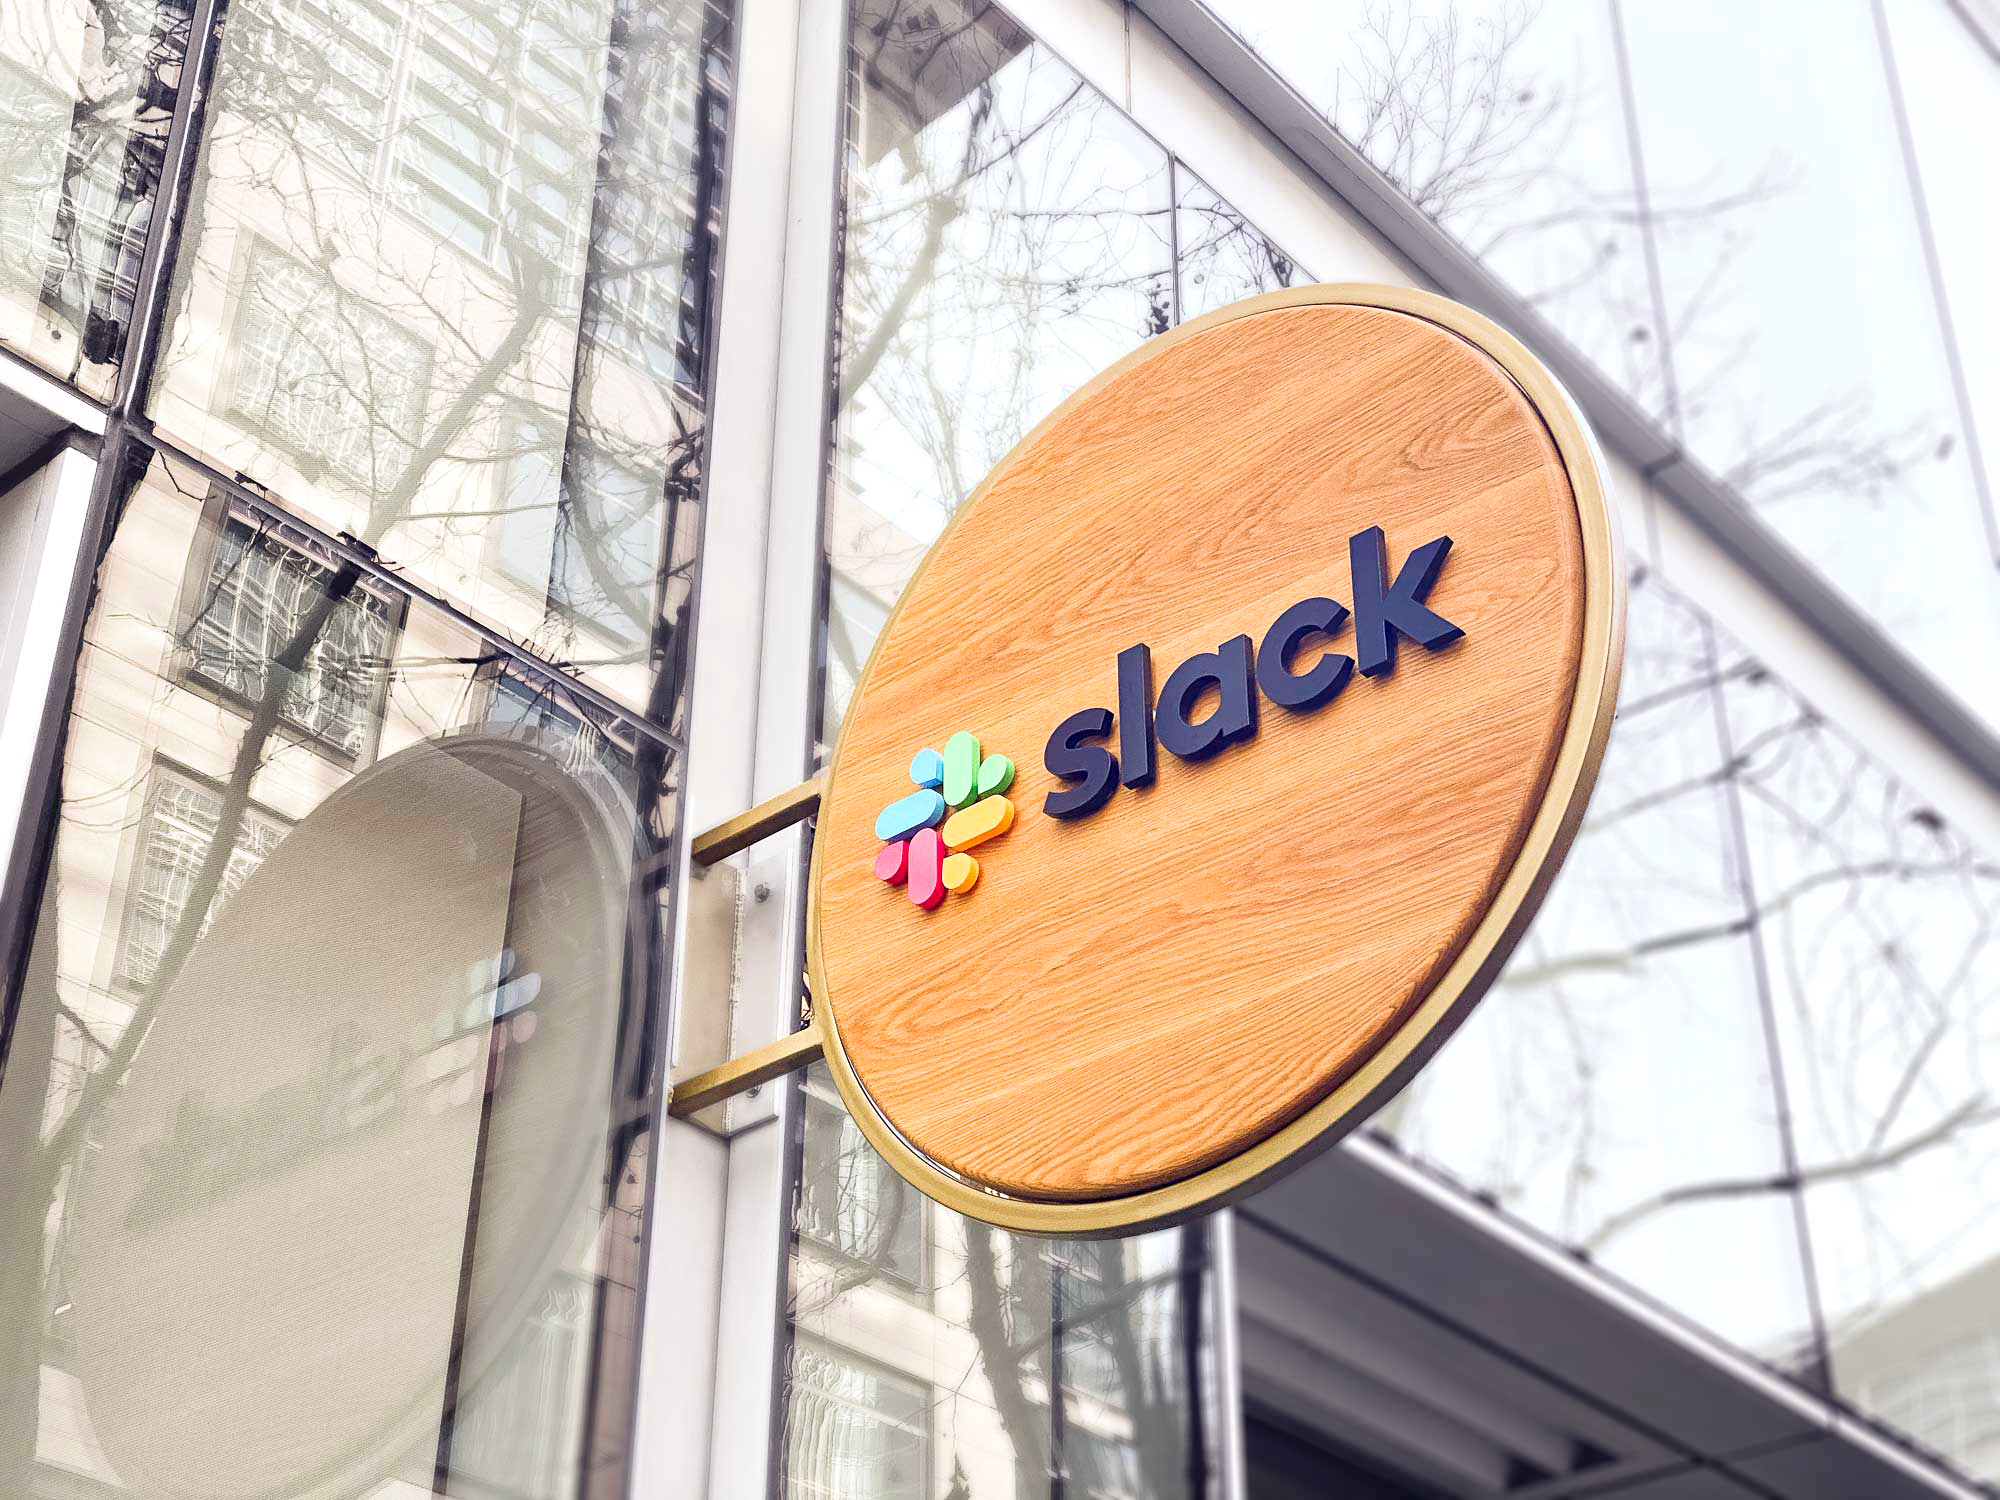 Wood blade sign with dimensional color logo and brass hardware for the San Francisco brand space at Slack, an American cloud-based set of team collaboration tools and services.